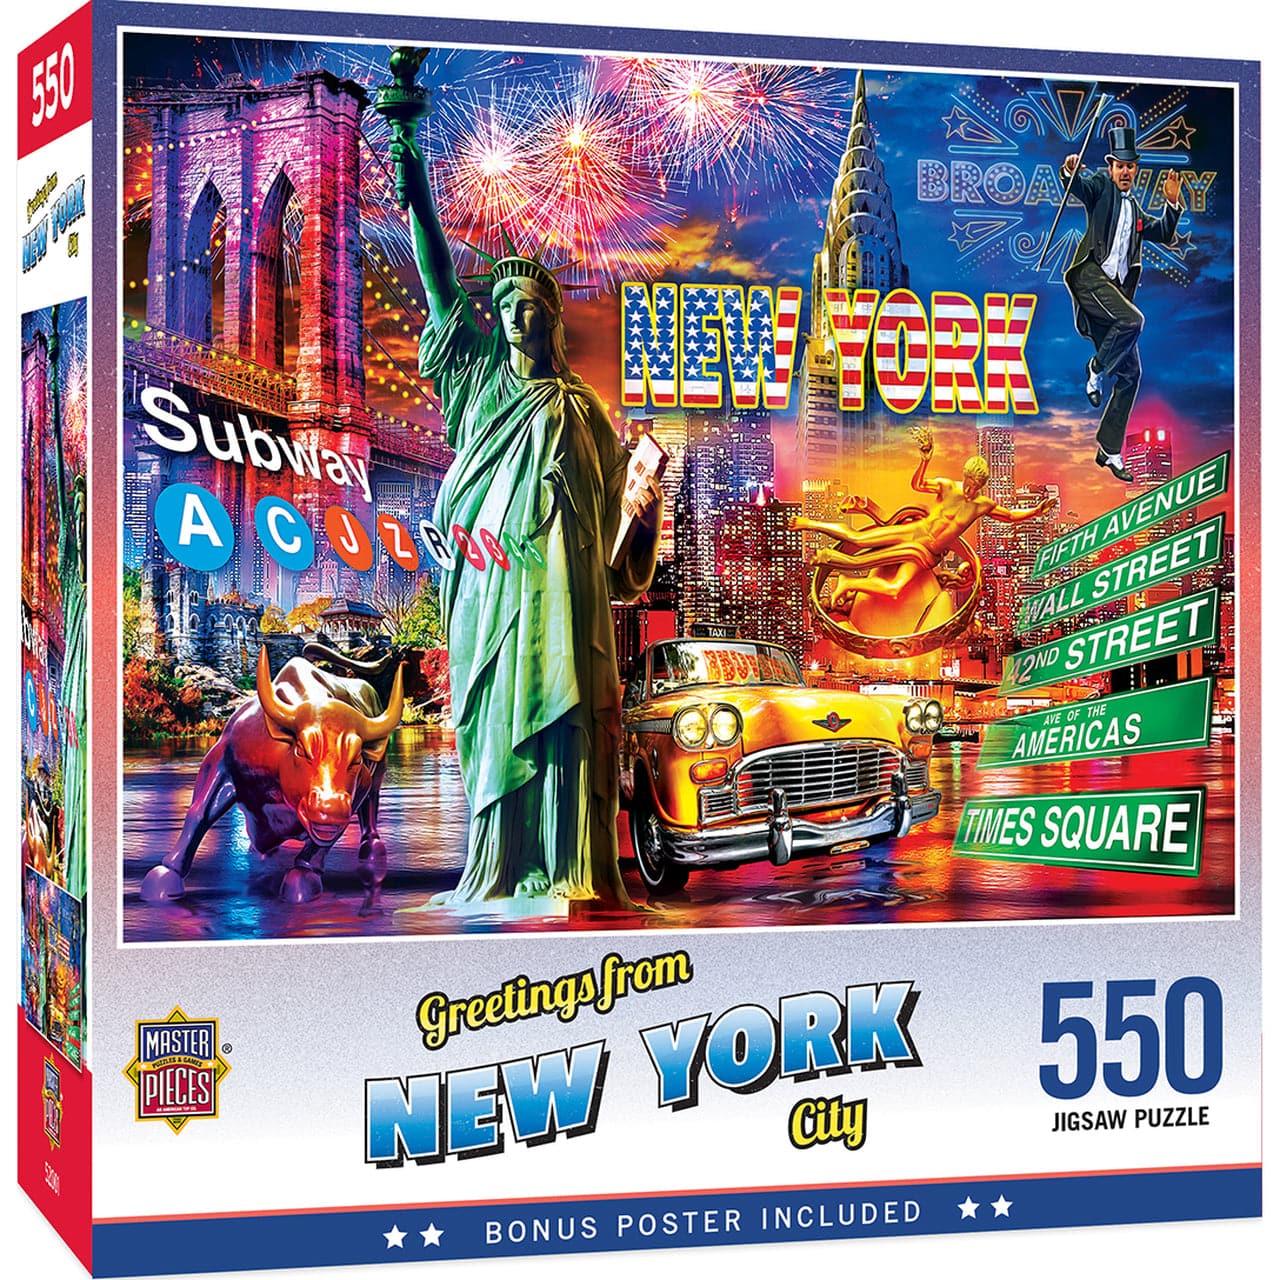 MasterPieces-Greetings From - New York City - 550 Piece Puzzle-32146-Legacy Toys